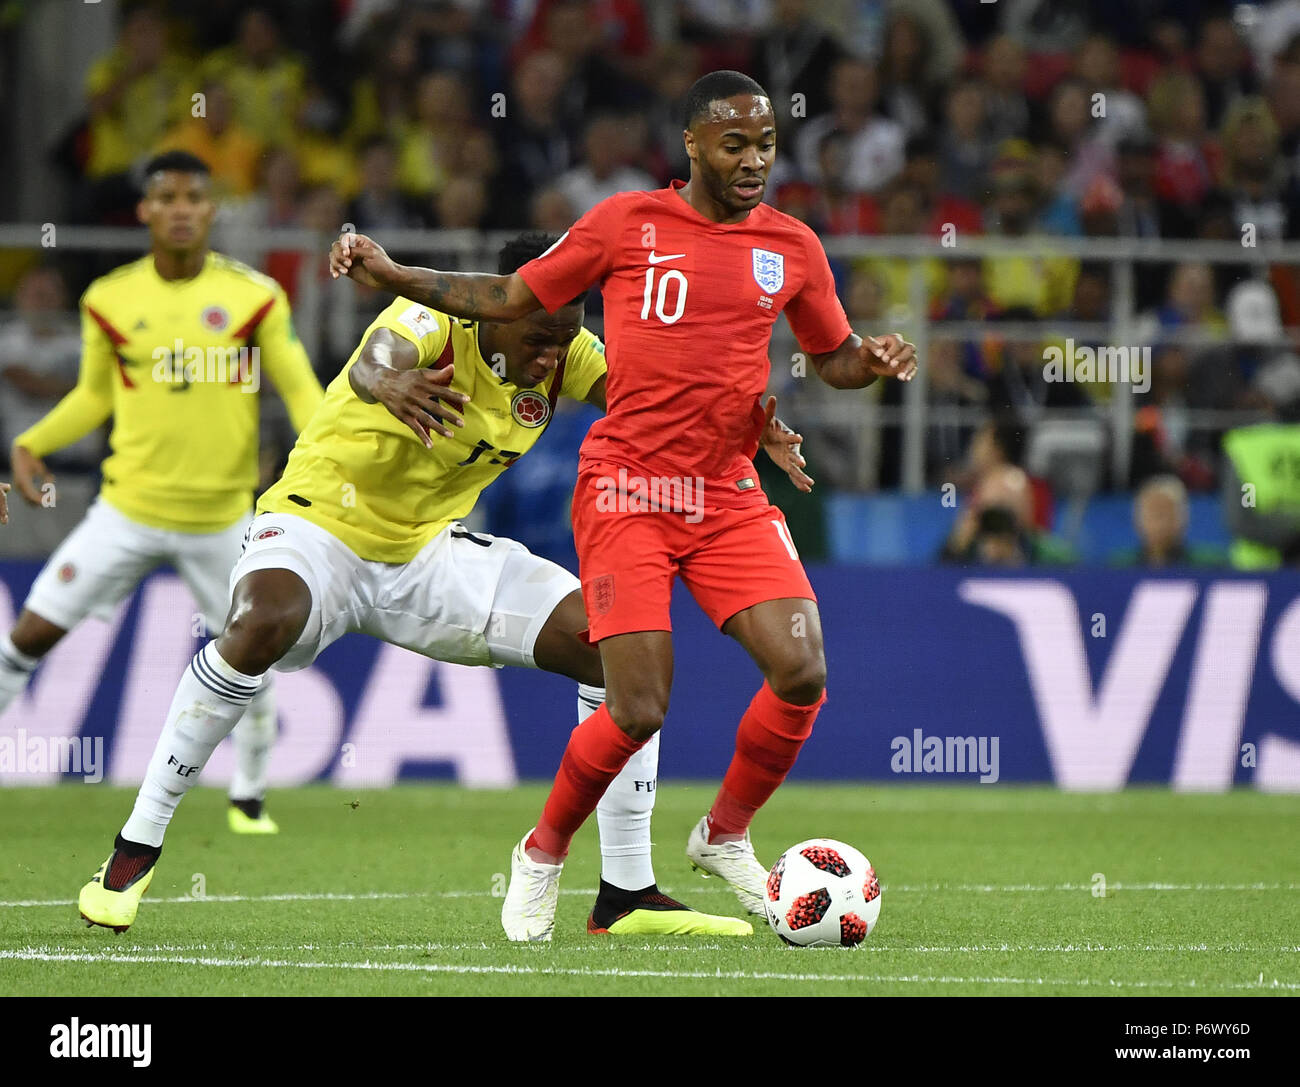 Moscow, Russia. 3rd July, 2018. Raheem Sterling (R) of England competes during the 2018 FIFA World Cup round of 16 match between England and Colombia in Moscow, Russia, July 3, 2018. Credit: He Canling/Xinhua/Alamy Live News Stock Photo